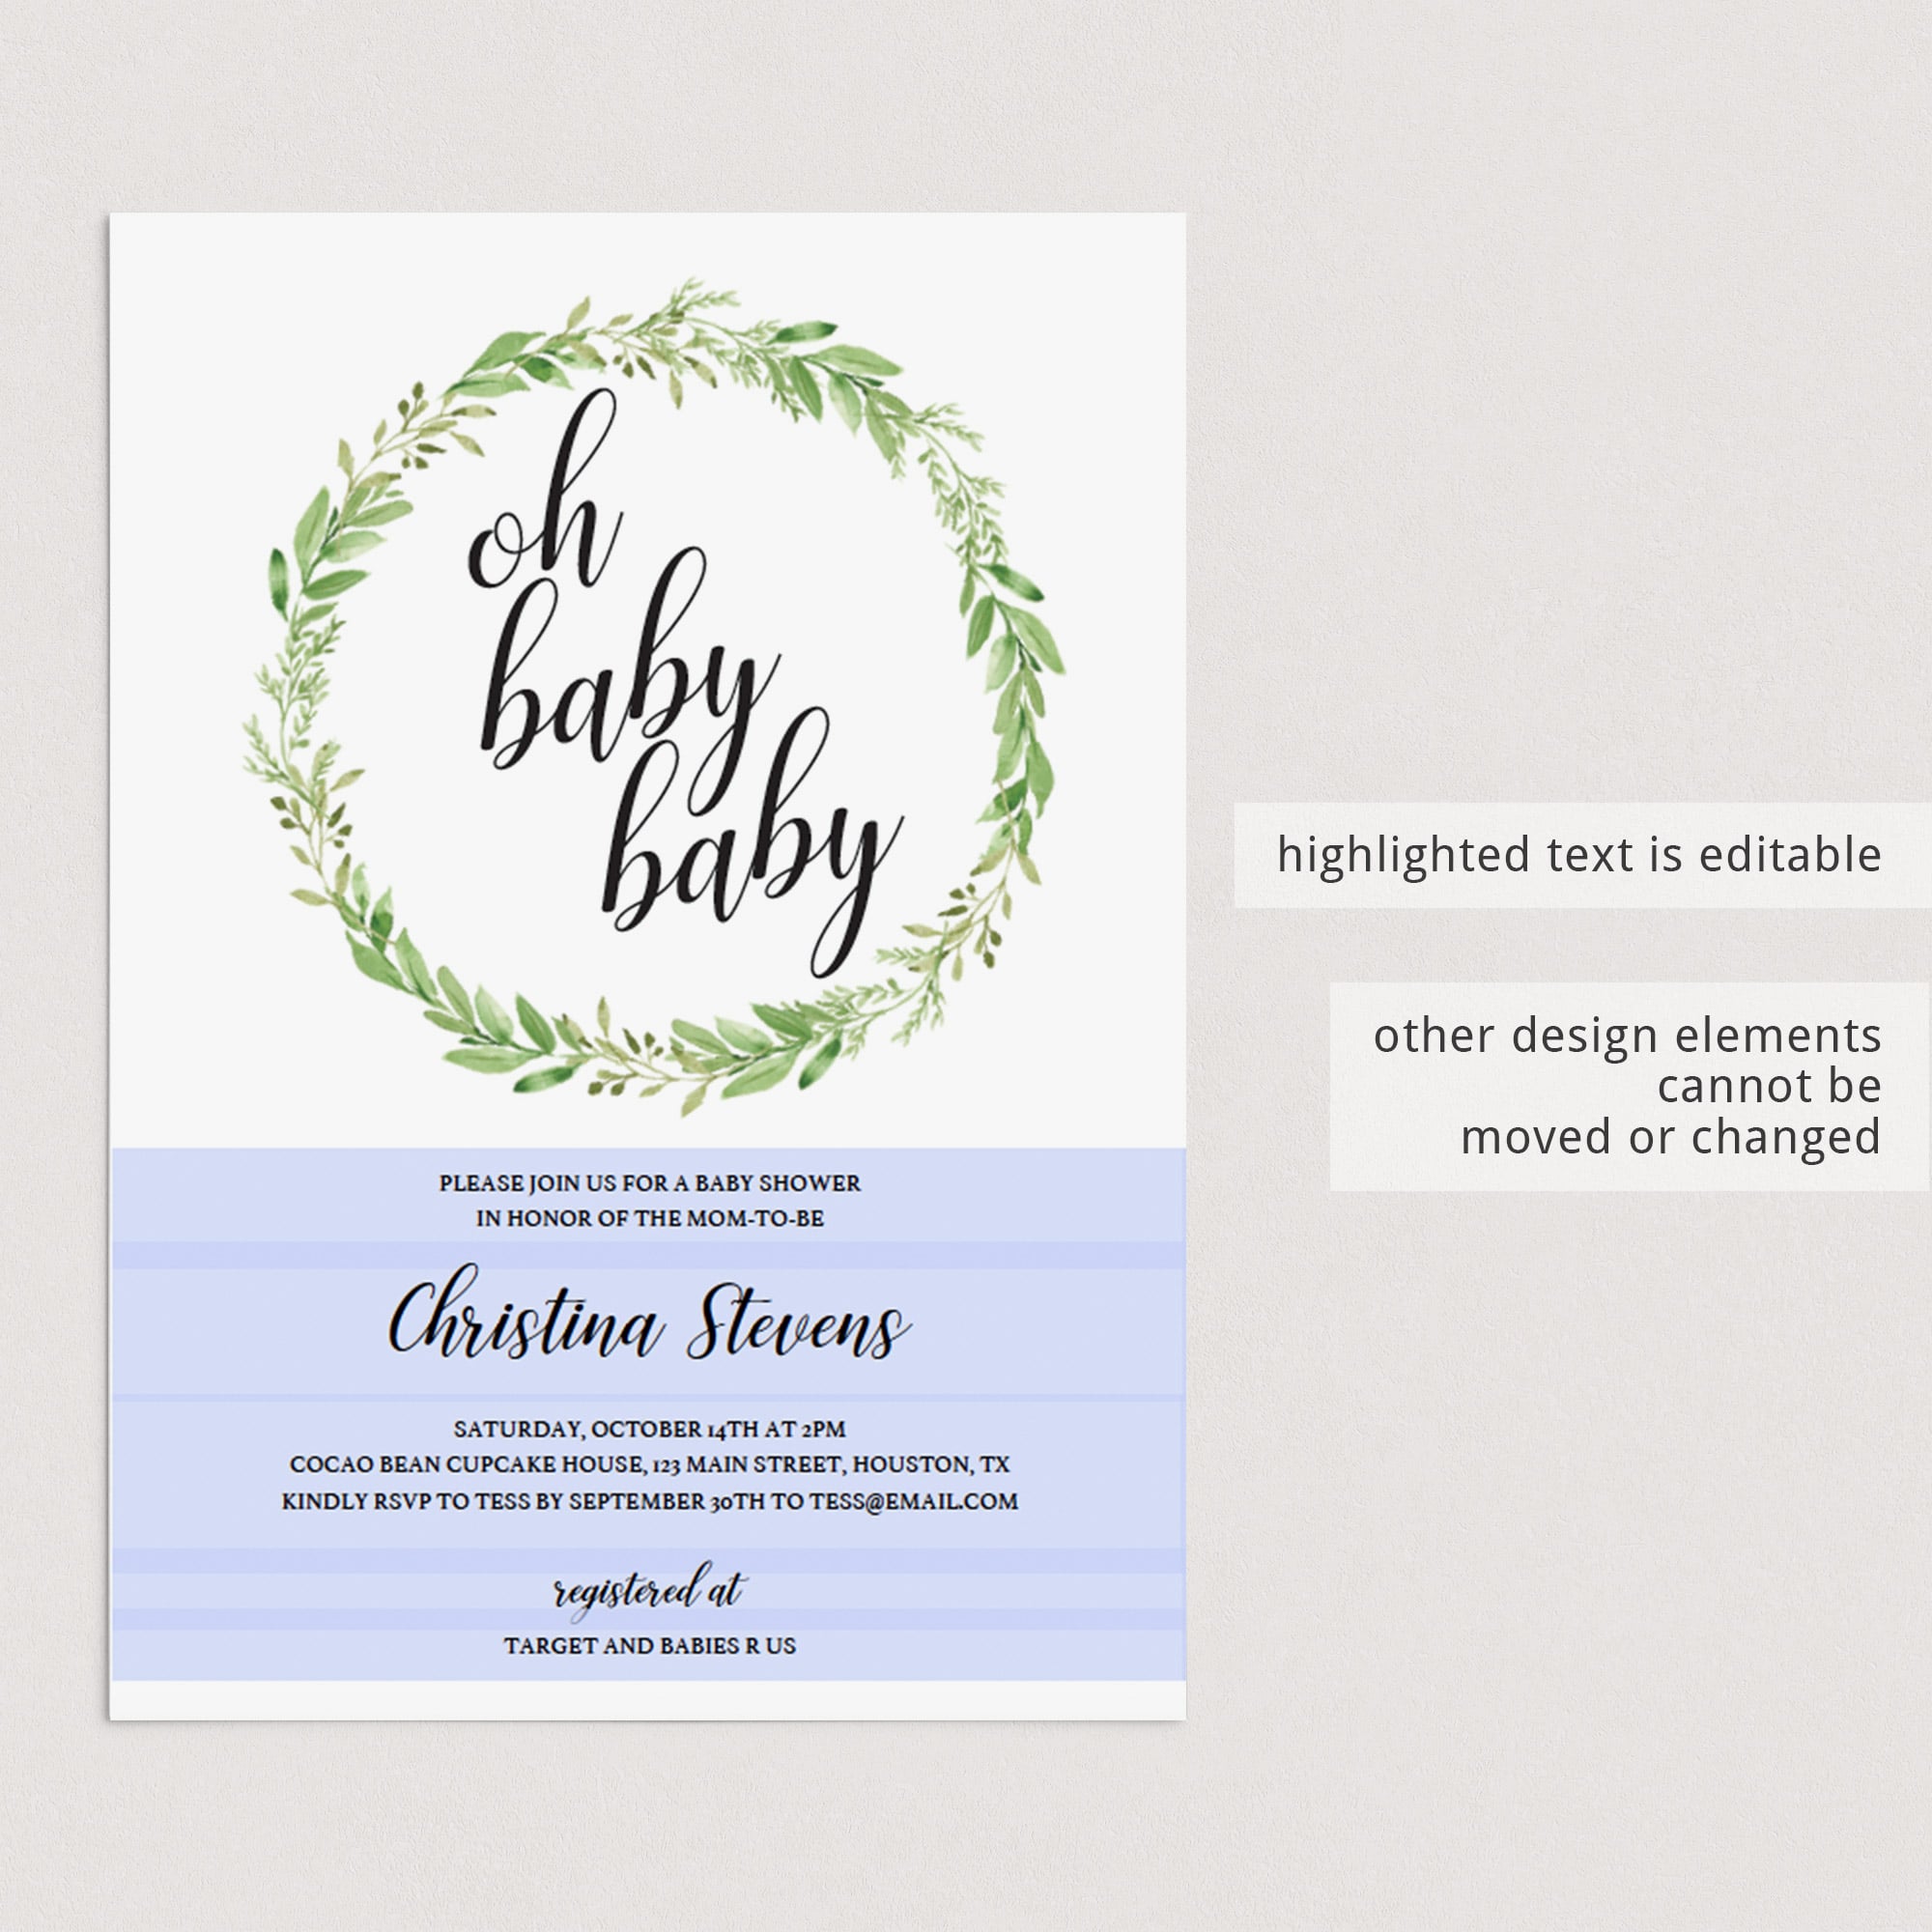 Oh baby baby invitation template for twin by LittleSizzle